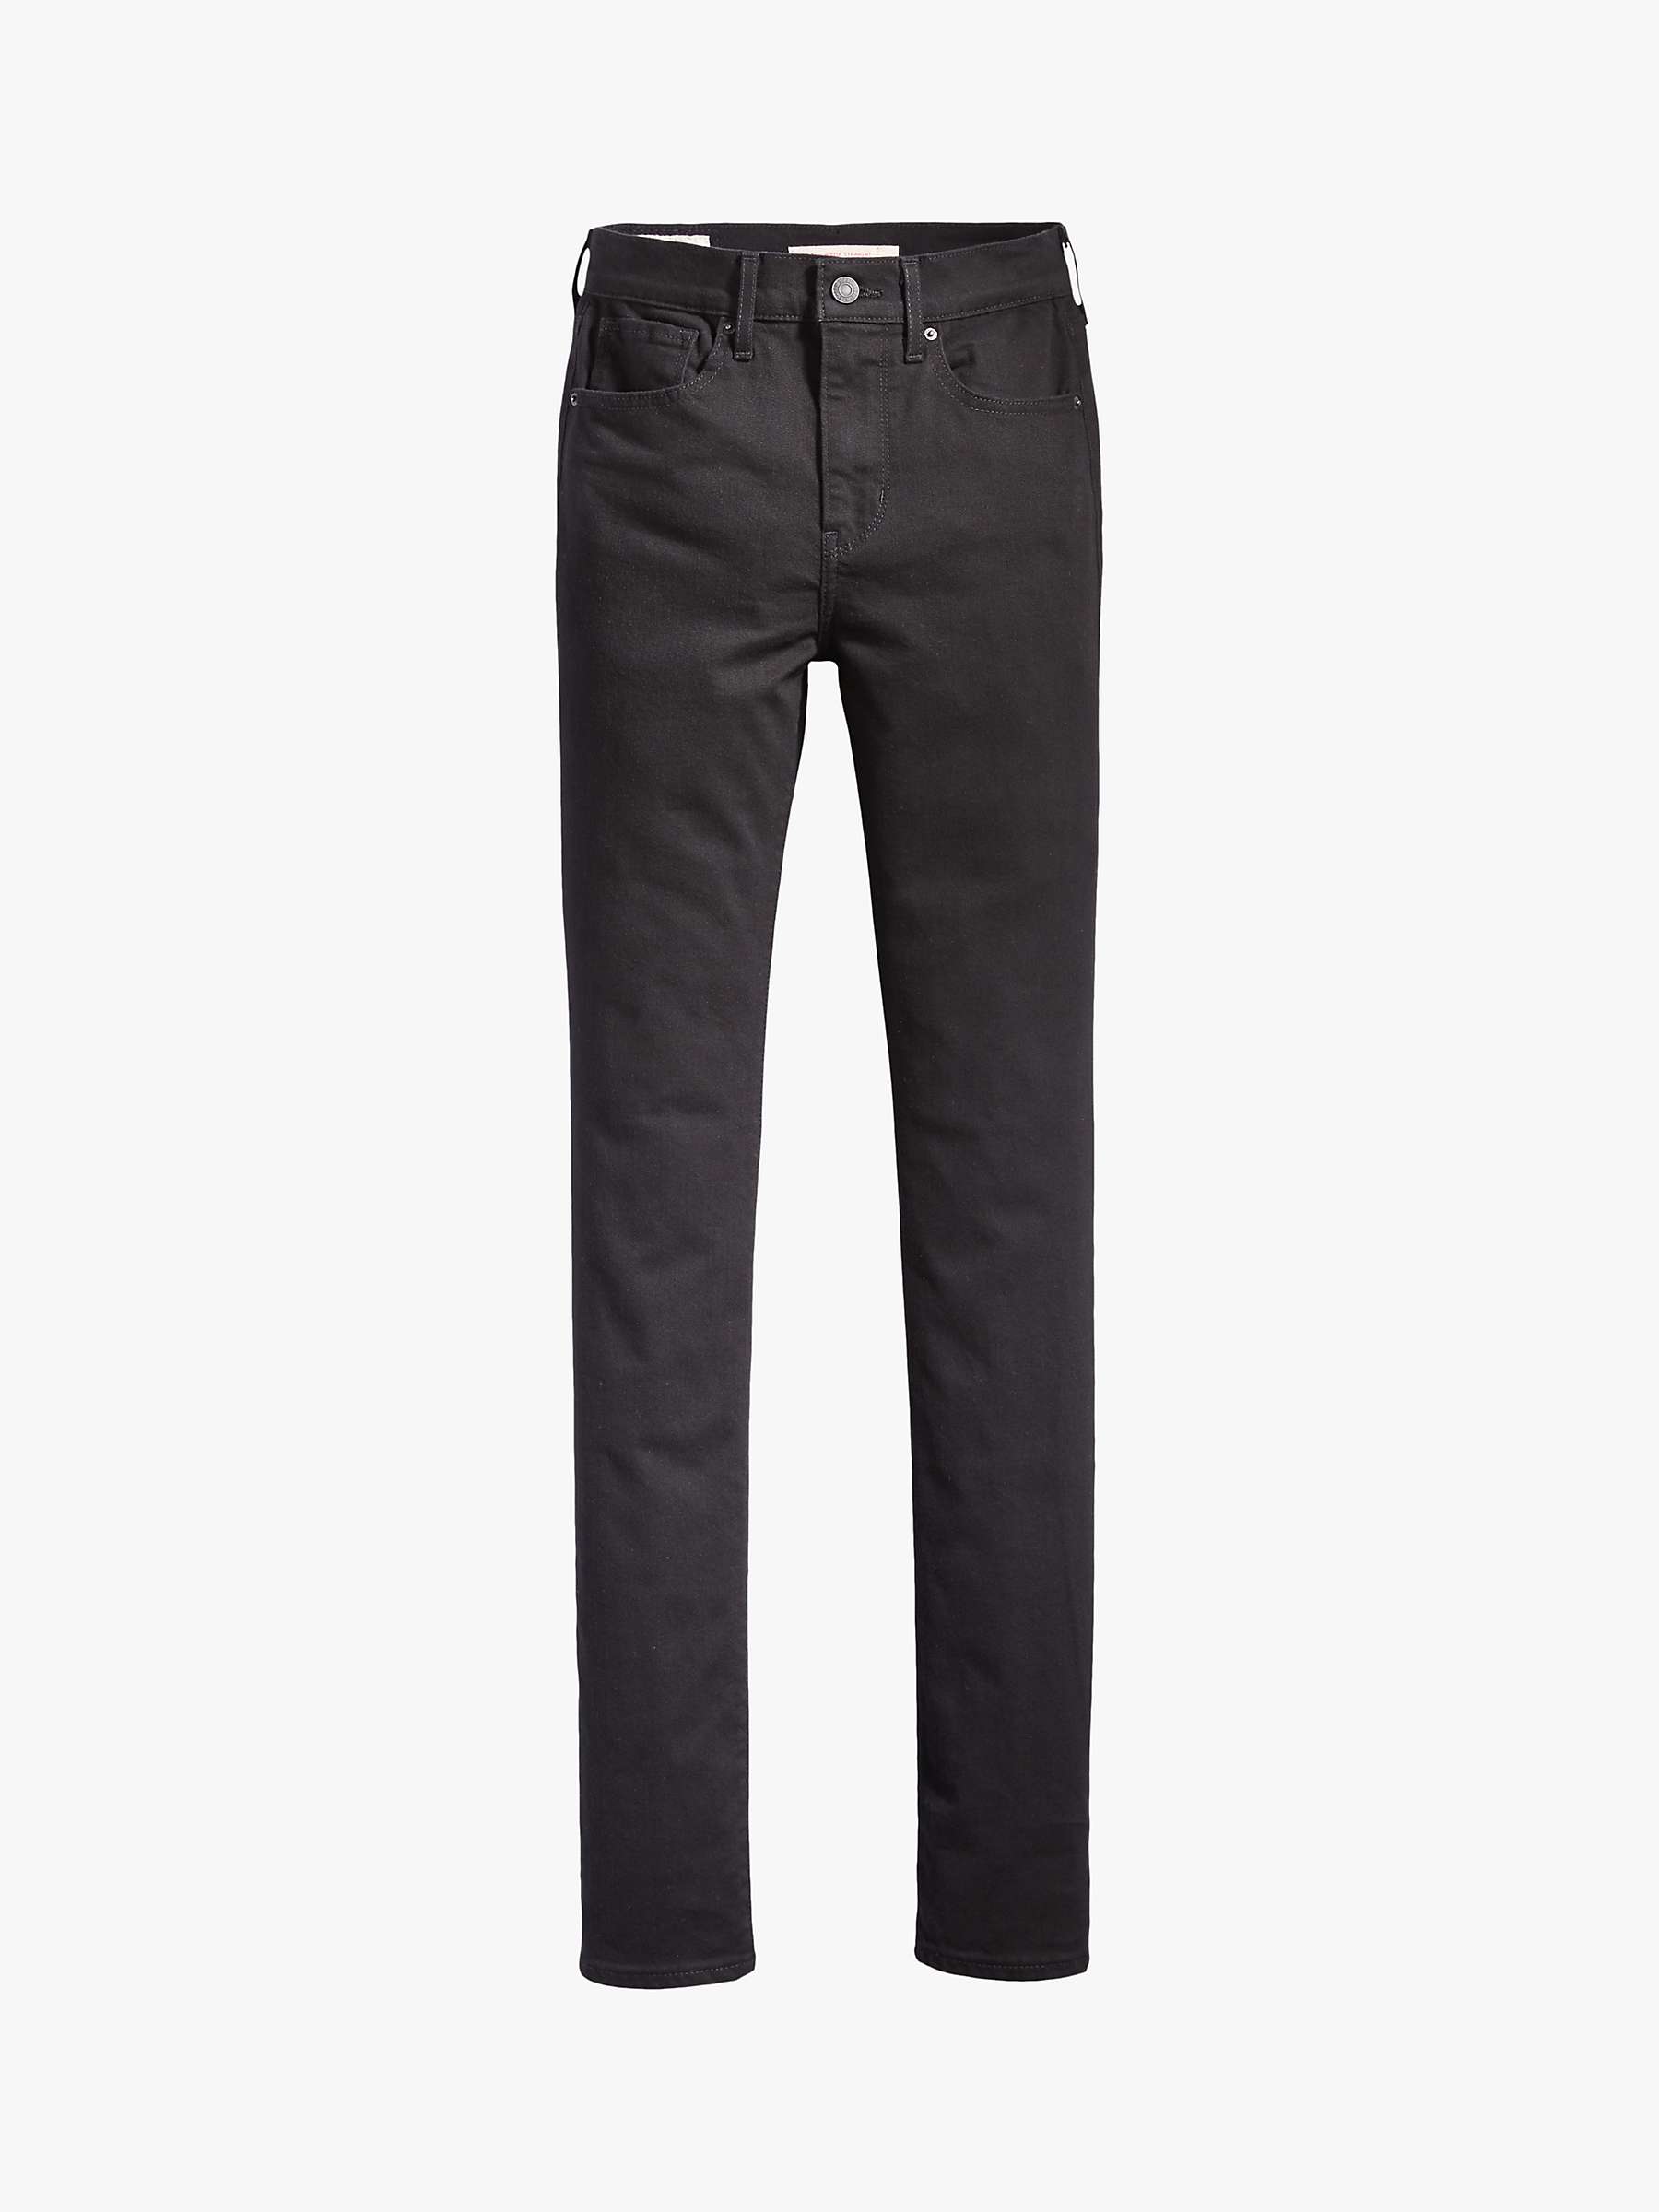 Buy Levi's 724 High Rise Straight Cut Jeans, Night Is Black Online at johnlewis.com